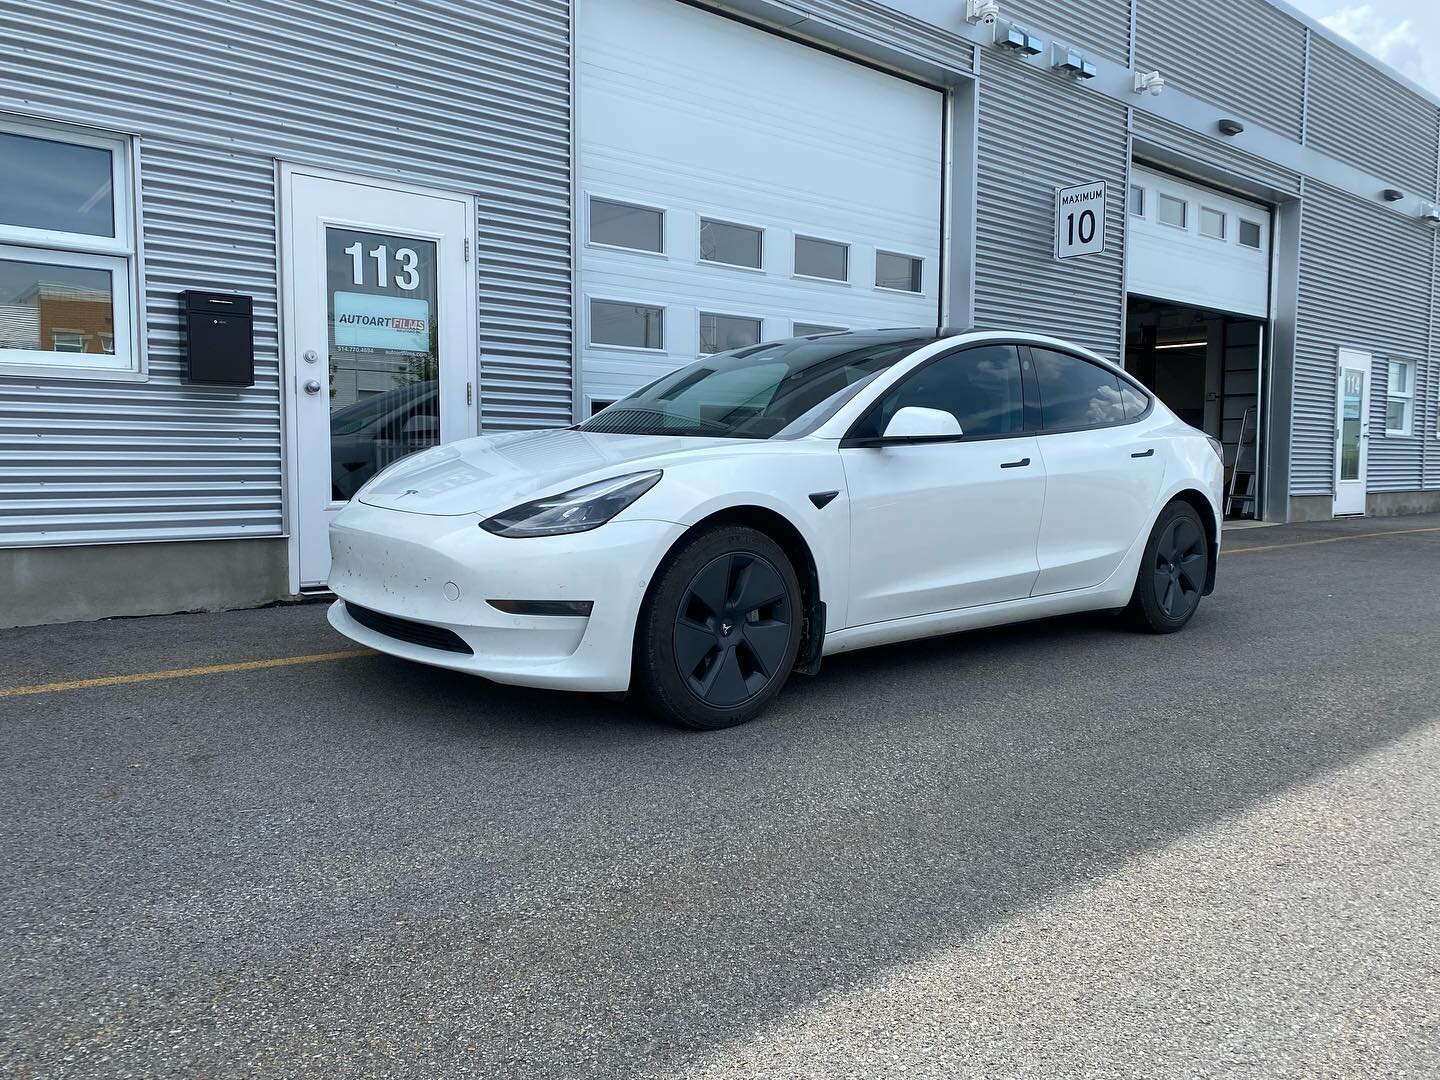 ❄️ Pure Elegance, Now Cooler Than Ever ❄️
This Tesla Model 3 is staying cool and elegant with our temperature control window film and our full front PPF kit with added rocker protection! Embrace the chill, embrace the style! 😎 #AutoArtFilmsSolutions